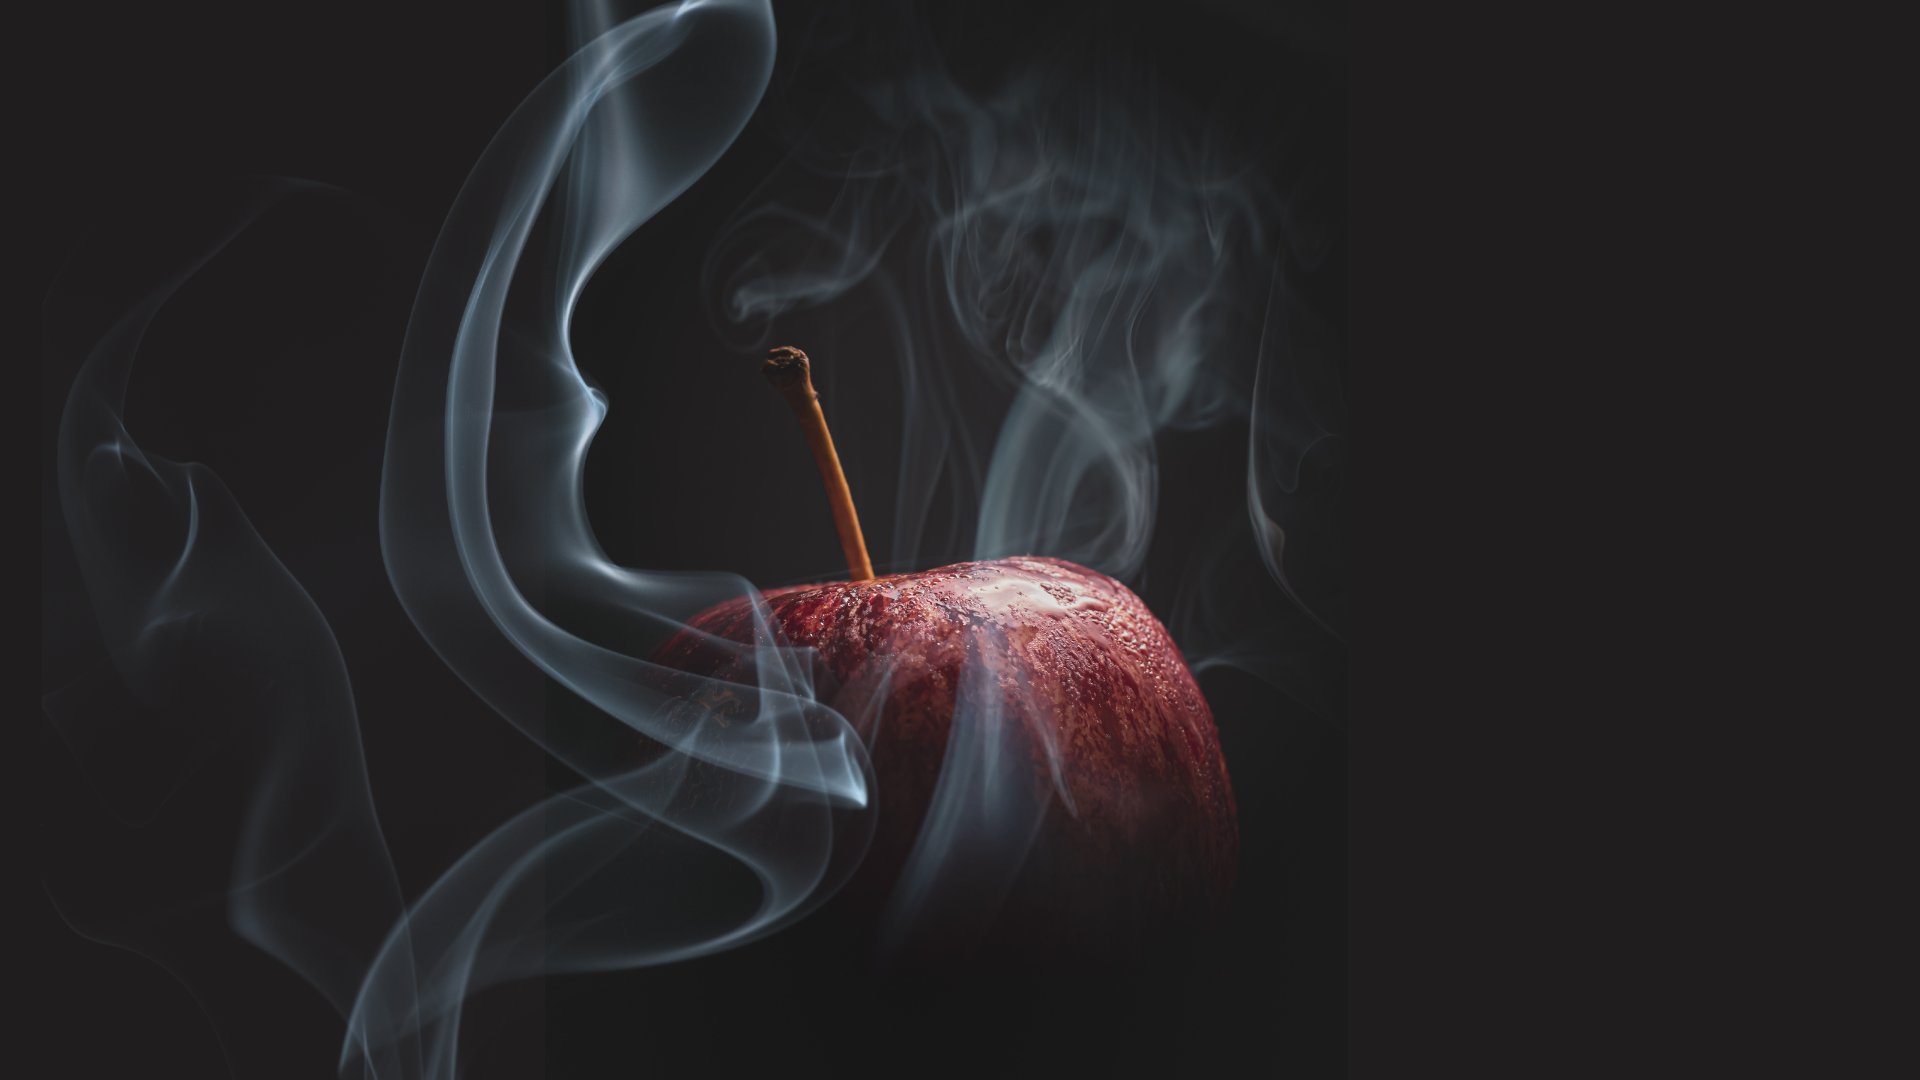 How to make an apple pipe, banana pipe, and other fruity smoking devices  